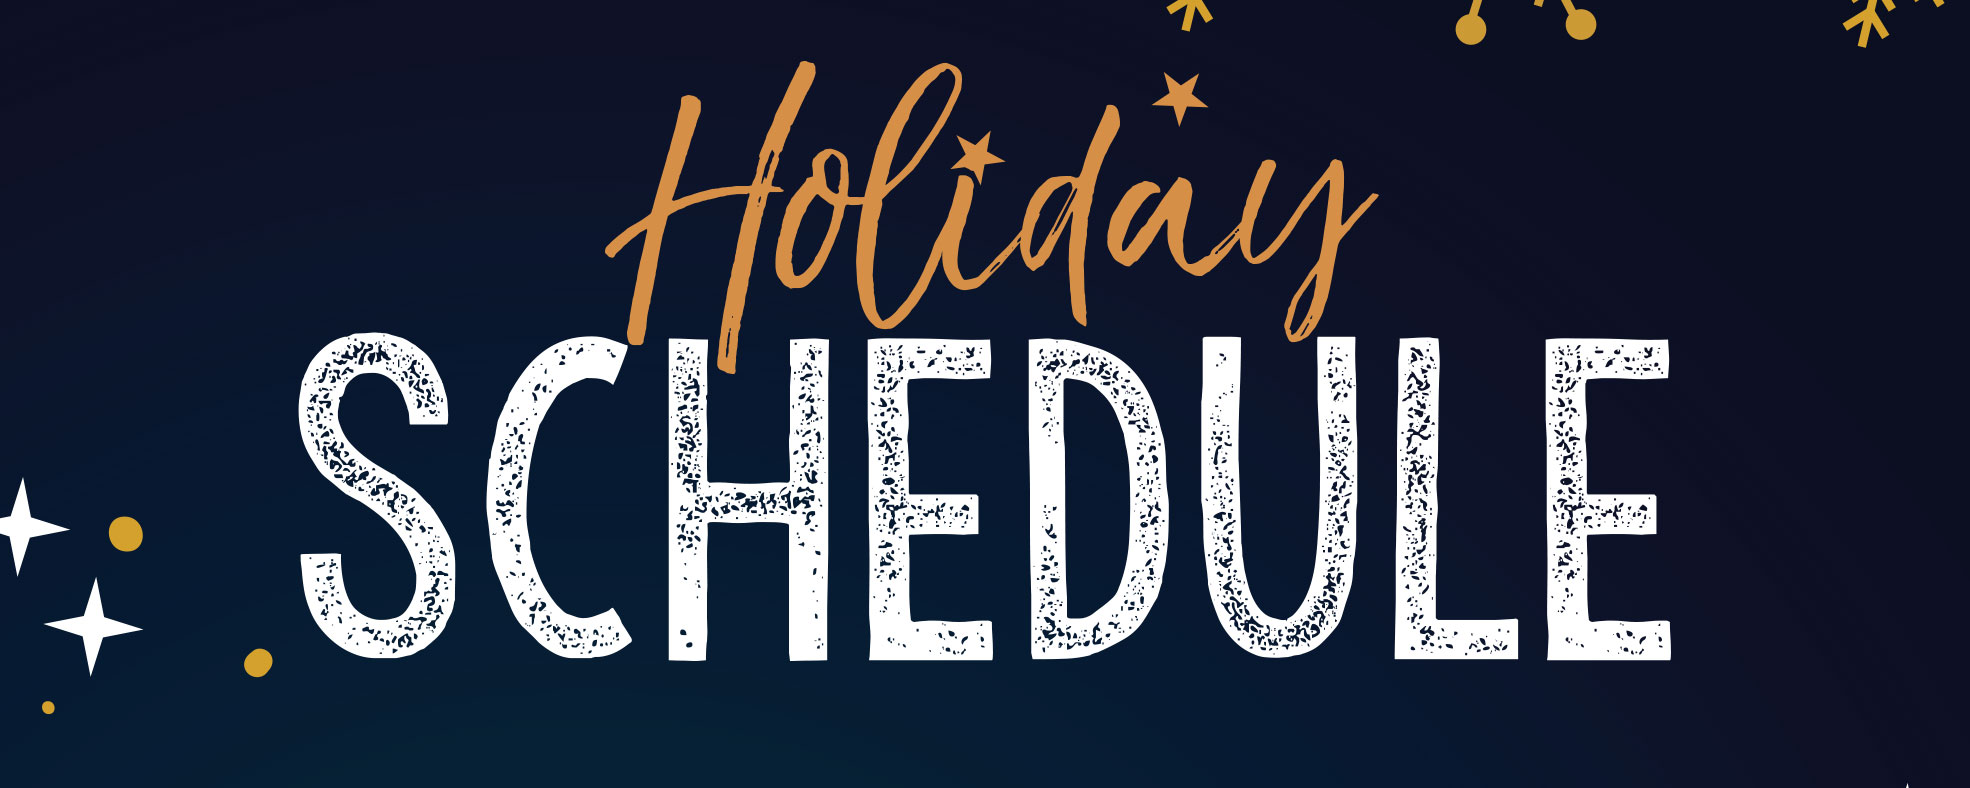 Holiday Hours at the club! Boys and Girls Clubs of Wichita Falls